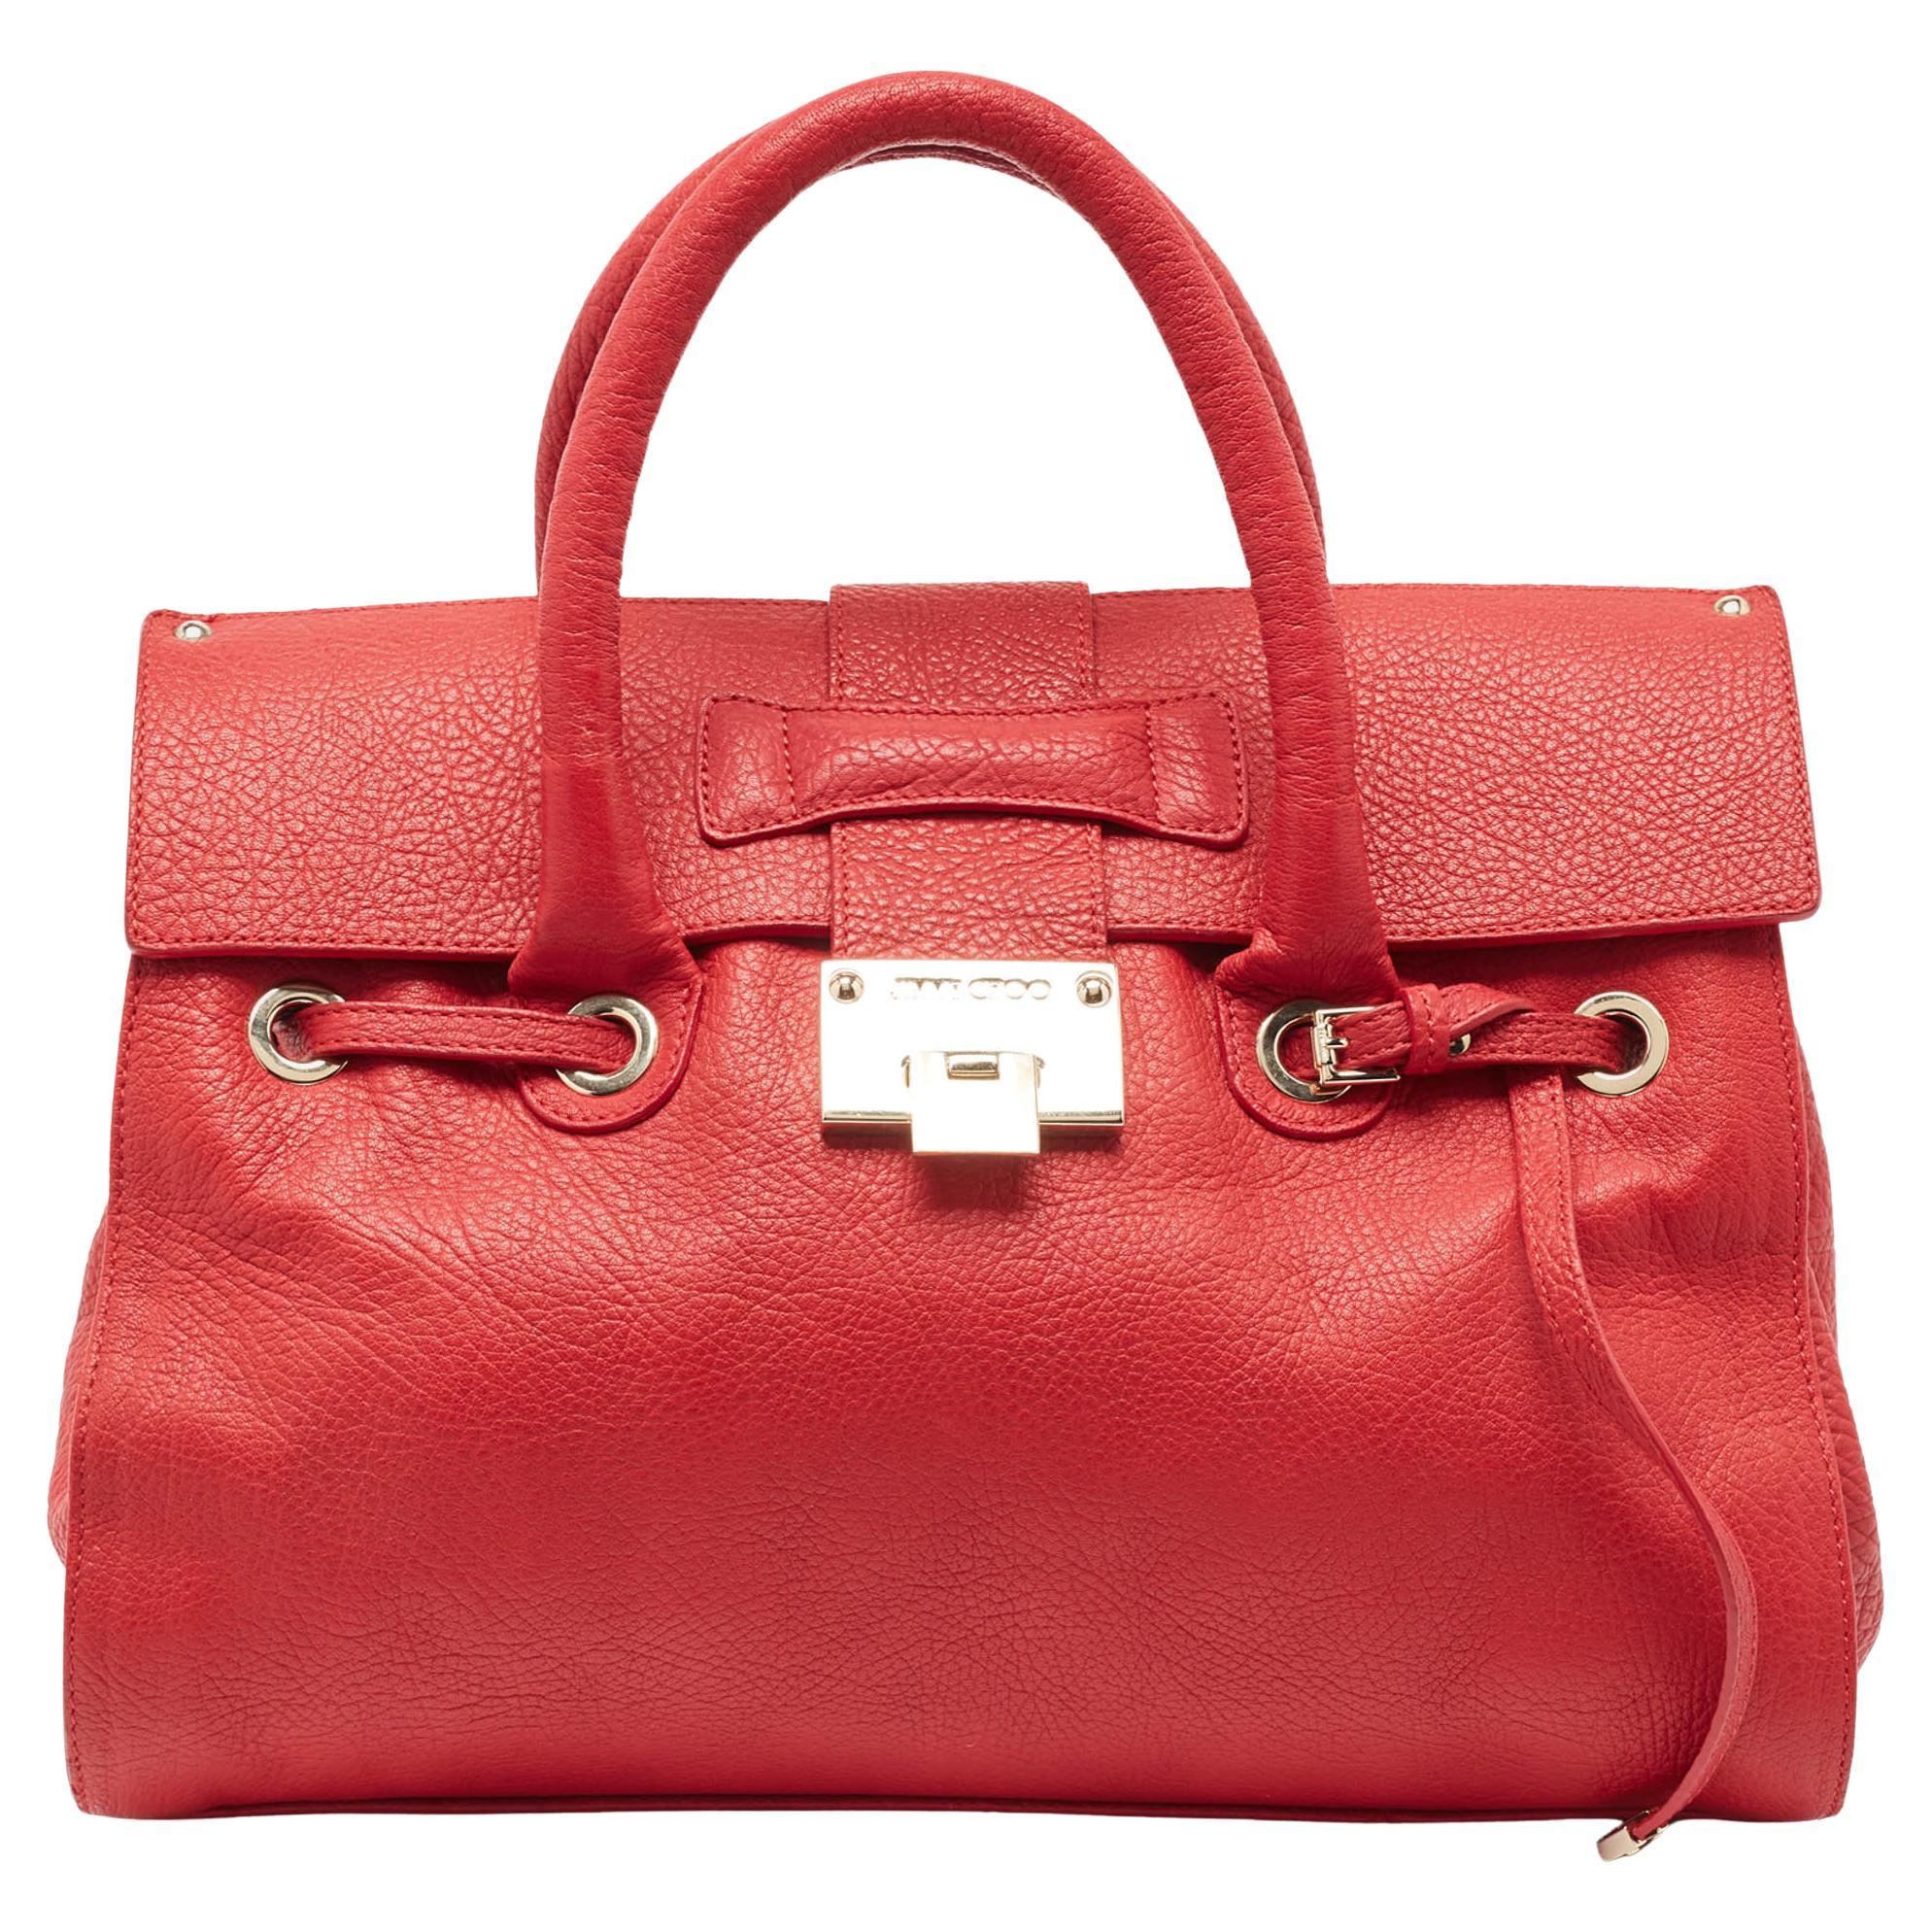 Jimmy Choo Red Leather Rosalie Satchel For Sale